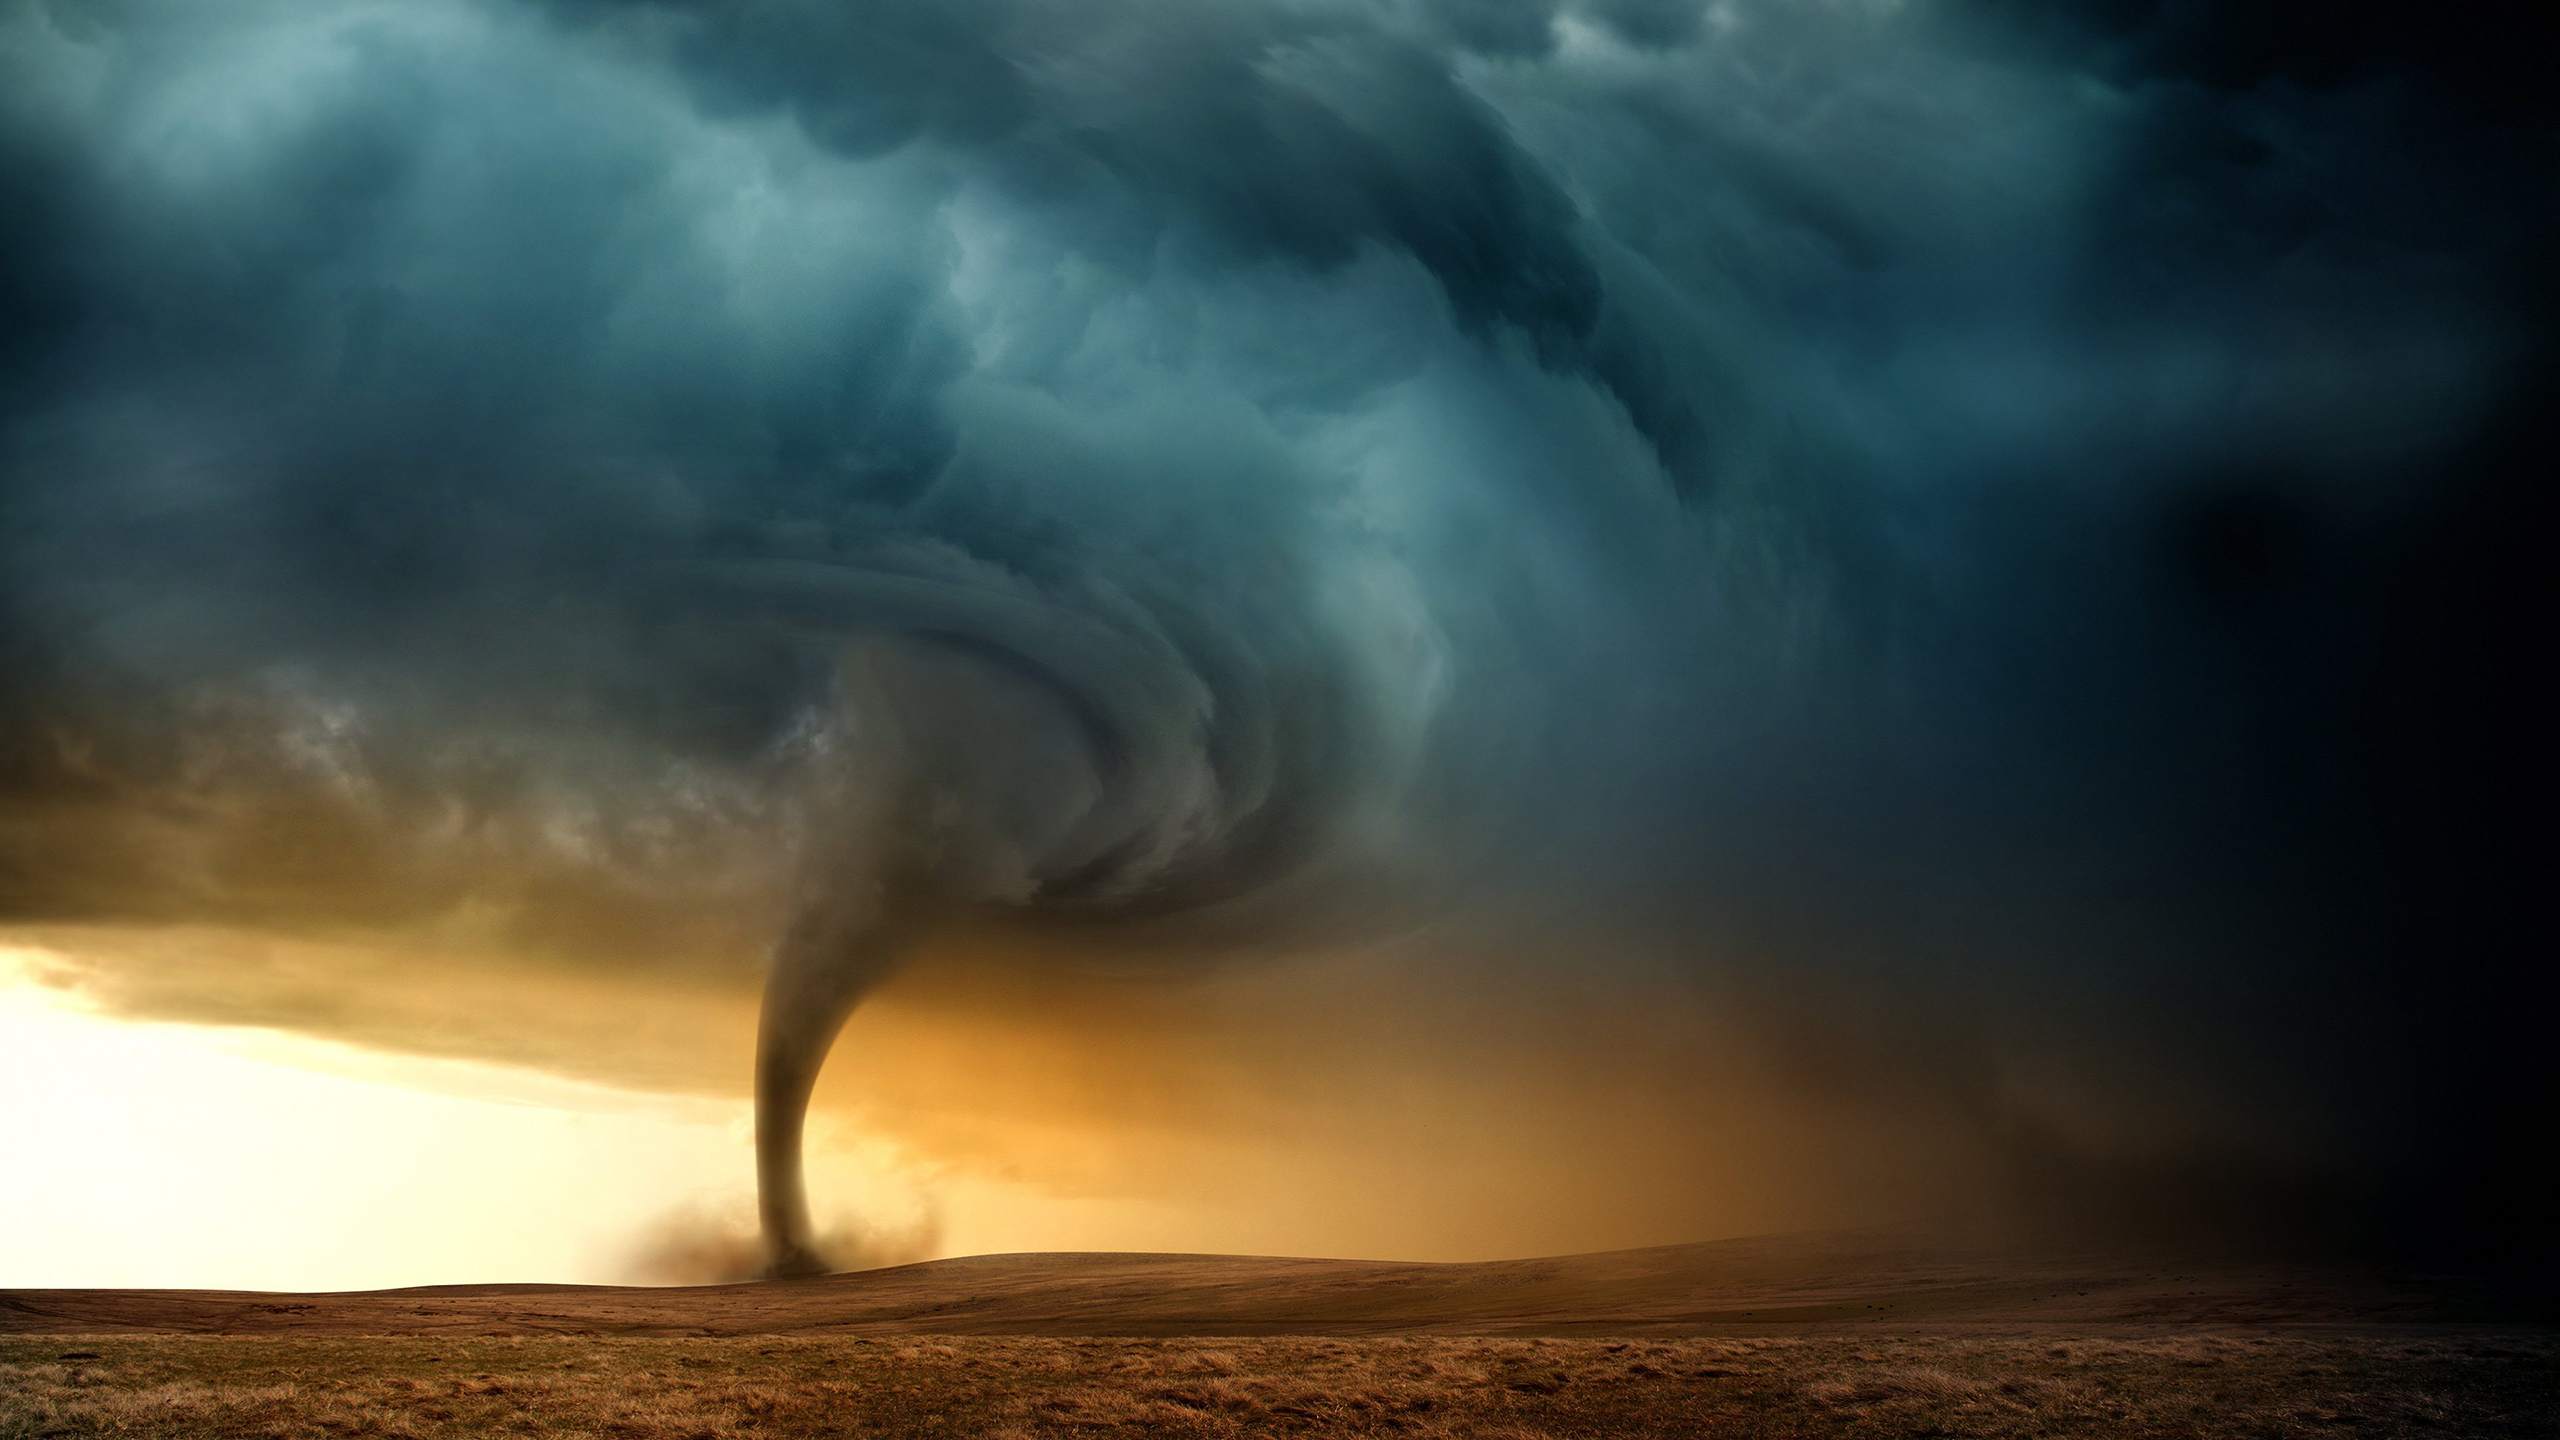 2560x1440 10+ Tornado HD Wallpapers and Backgrounds